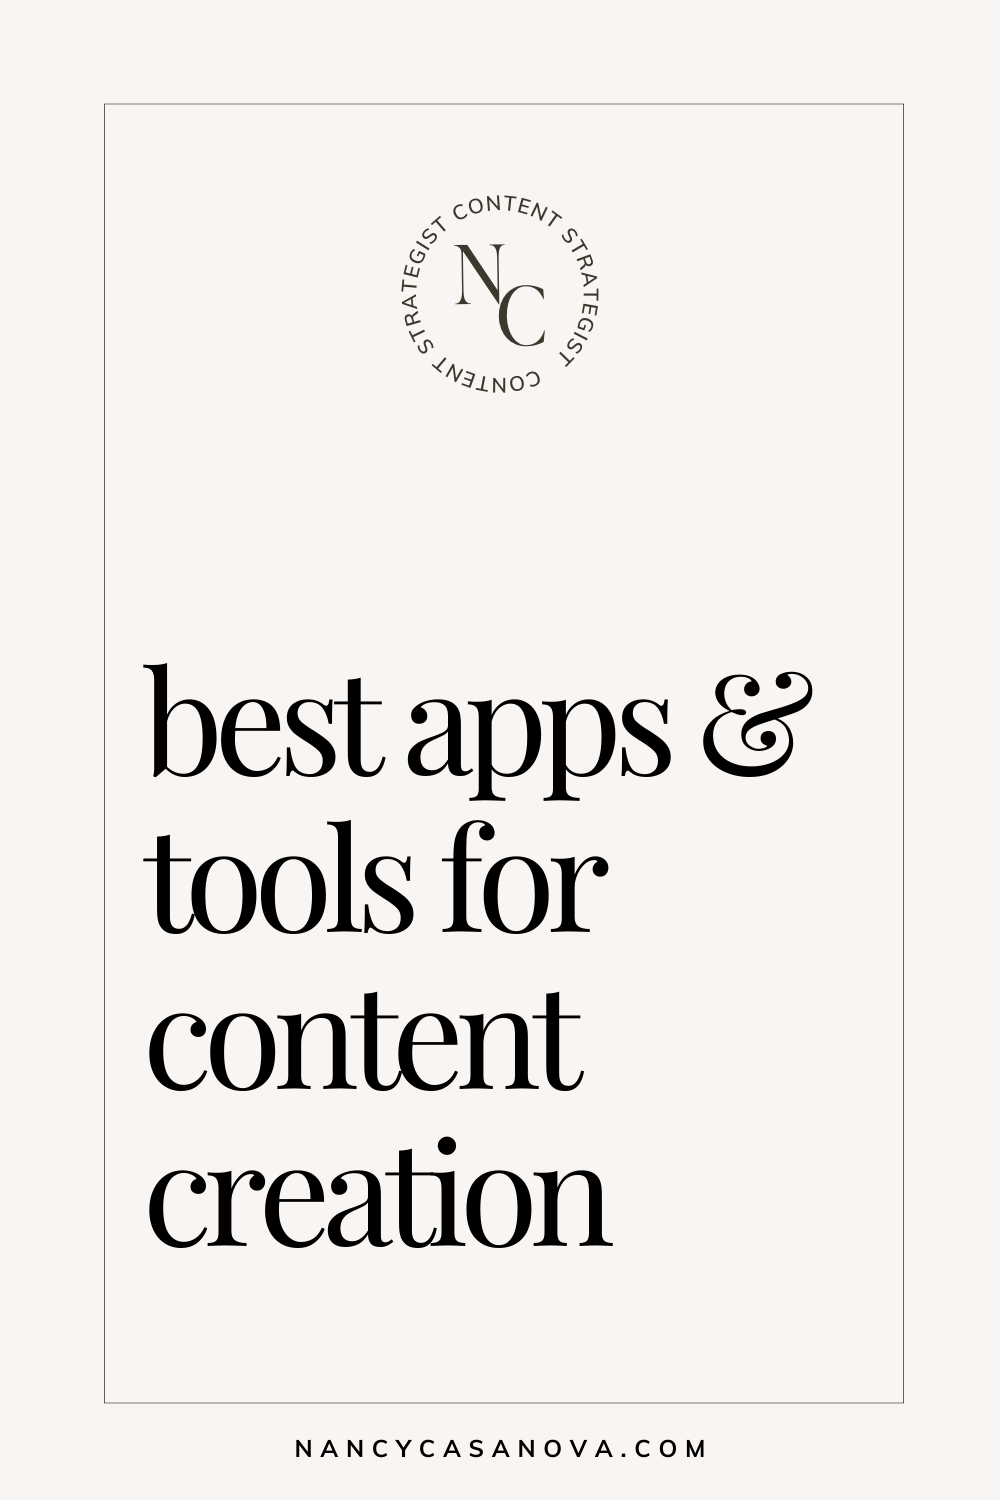 Check out these apps and tools that will help you easily create content that is visually engaging and impactful.